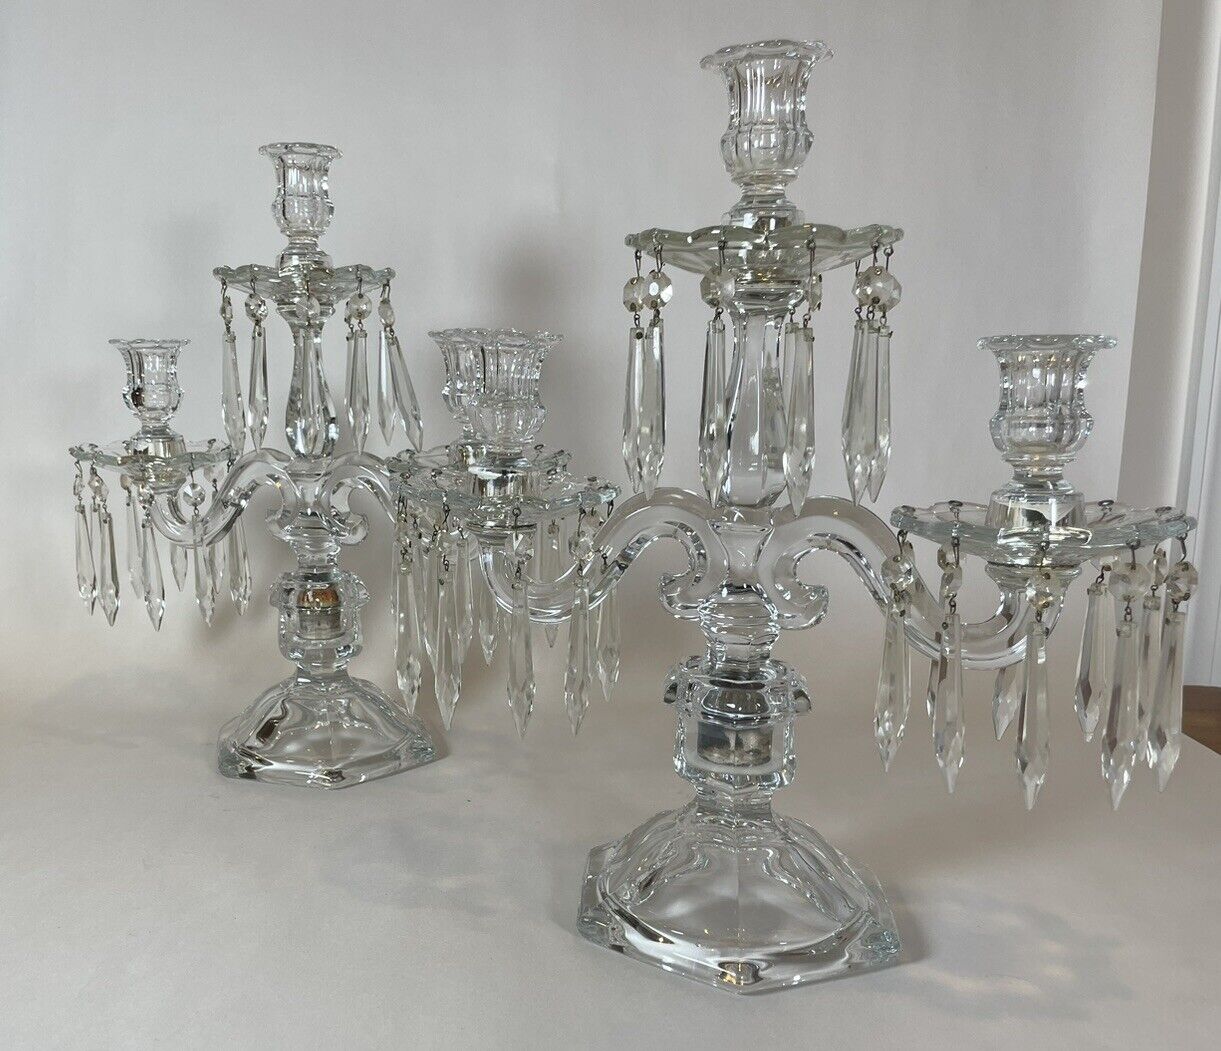 PAIR Of EUROPEAN 3 ARM CANDLE HOLDERS